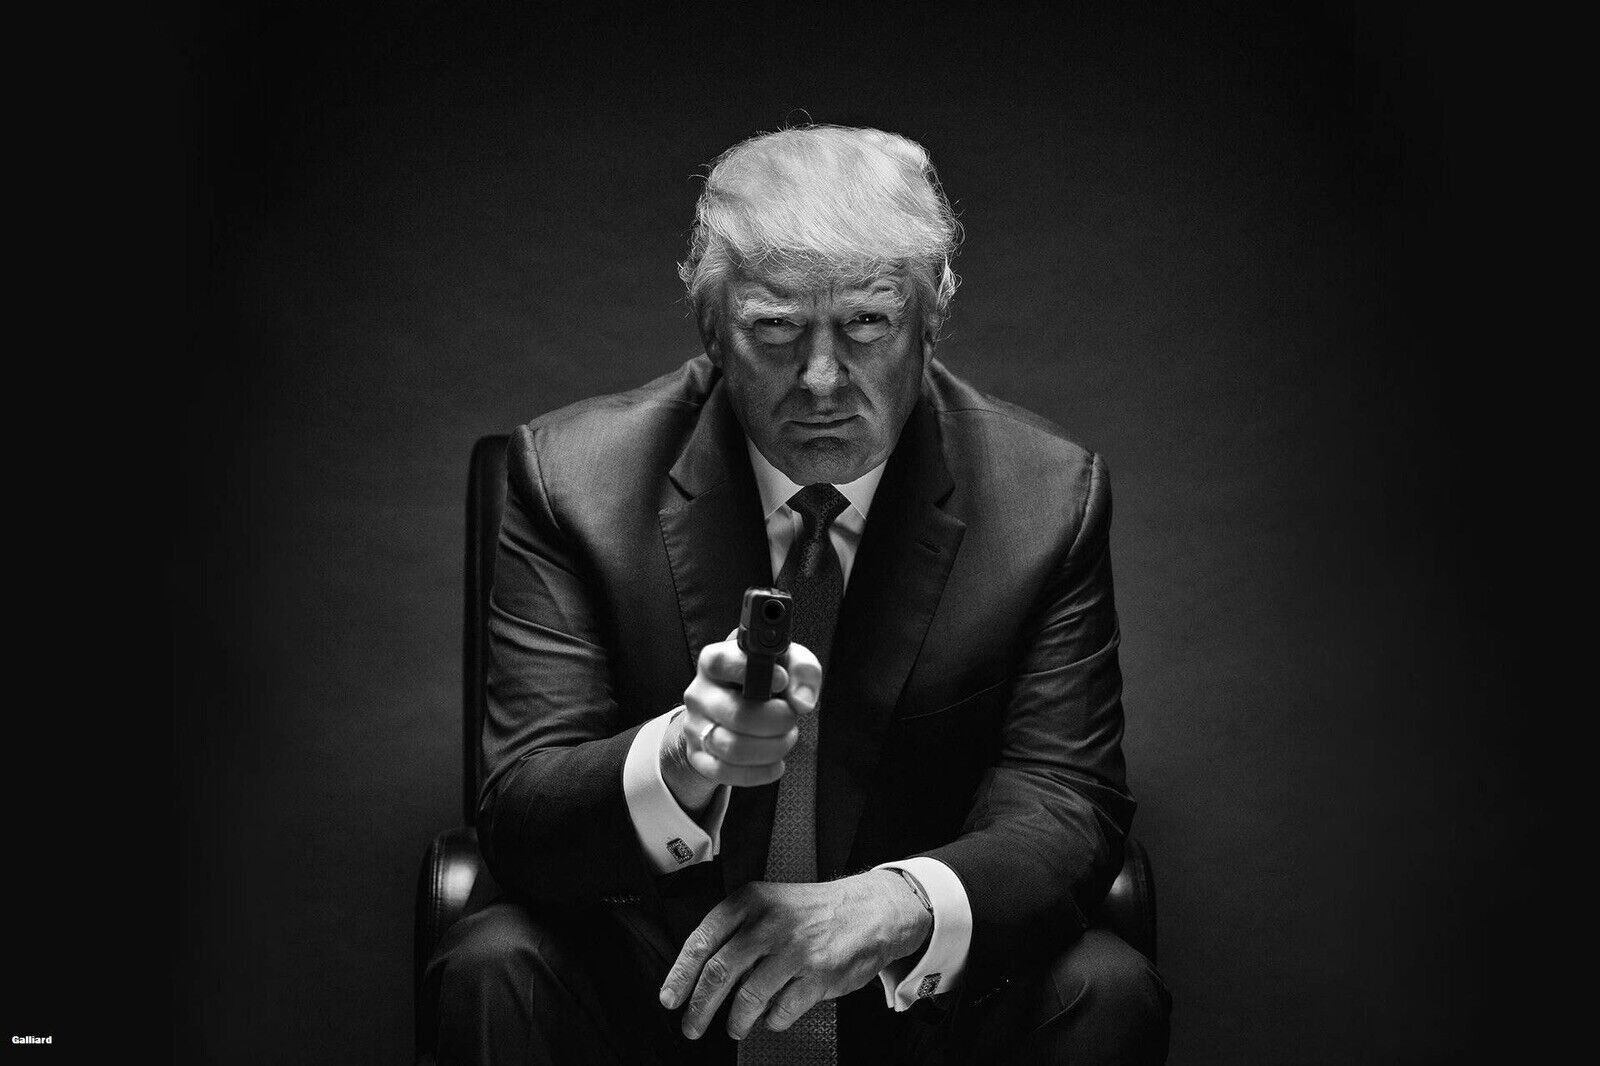 TRUMP FIRING BACK AFTER ASSASSINATION ATTEMPT AI PHOTO 8x10 Glossy Printed Photo